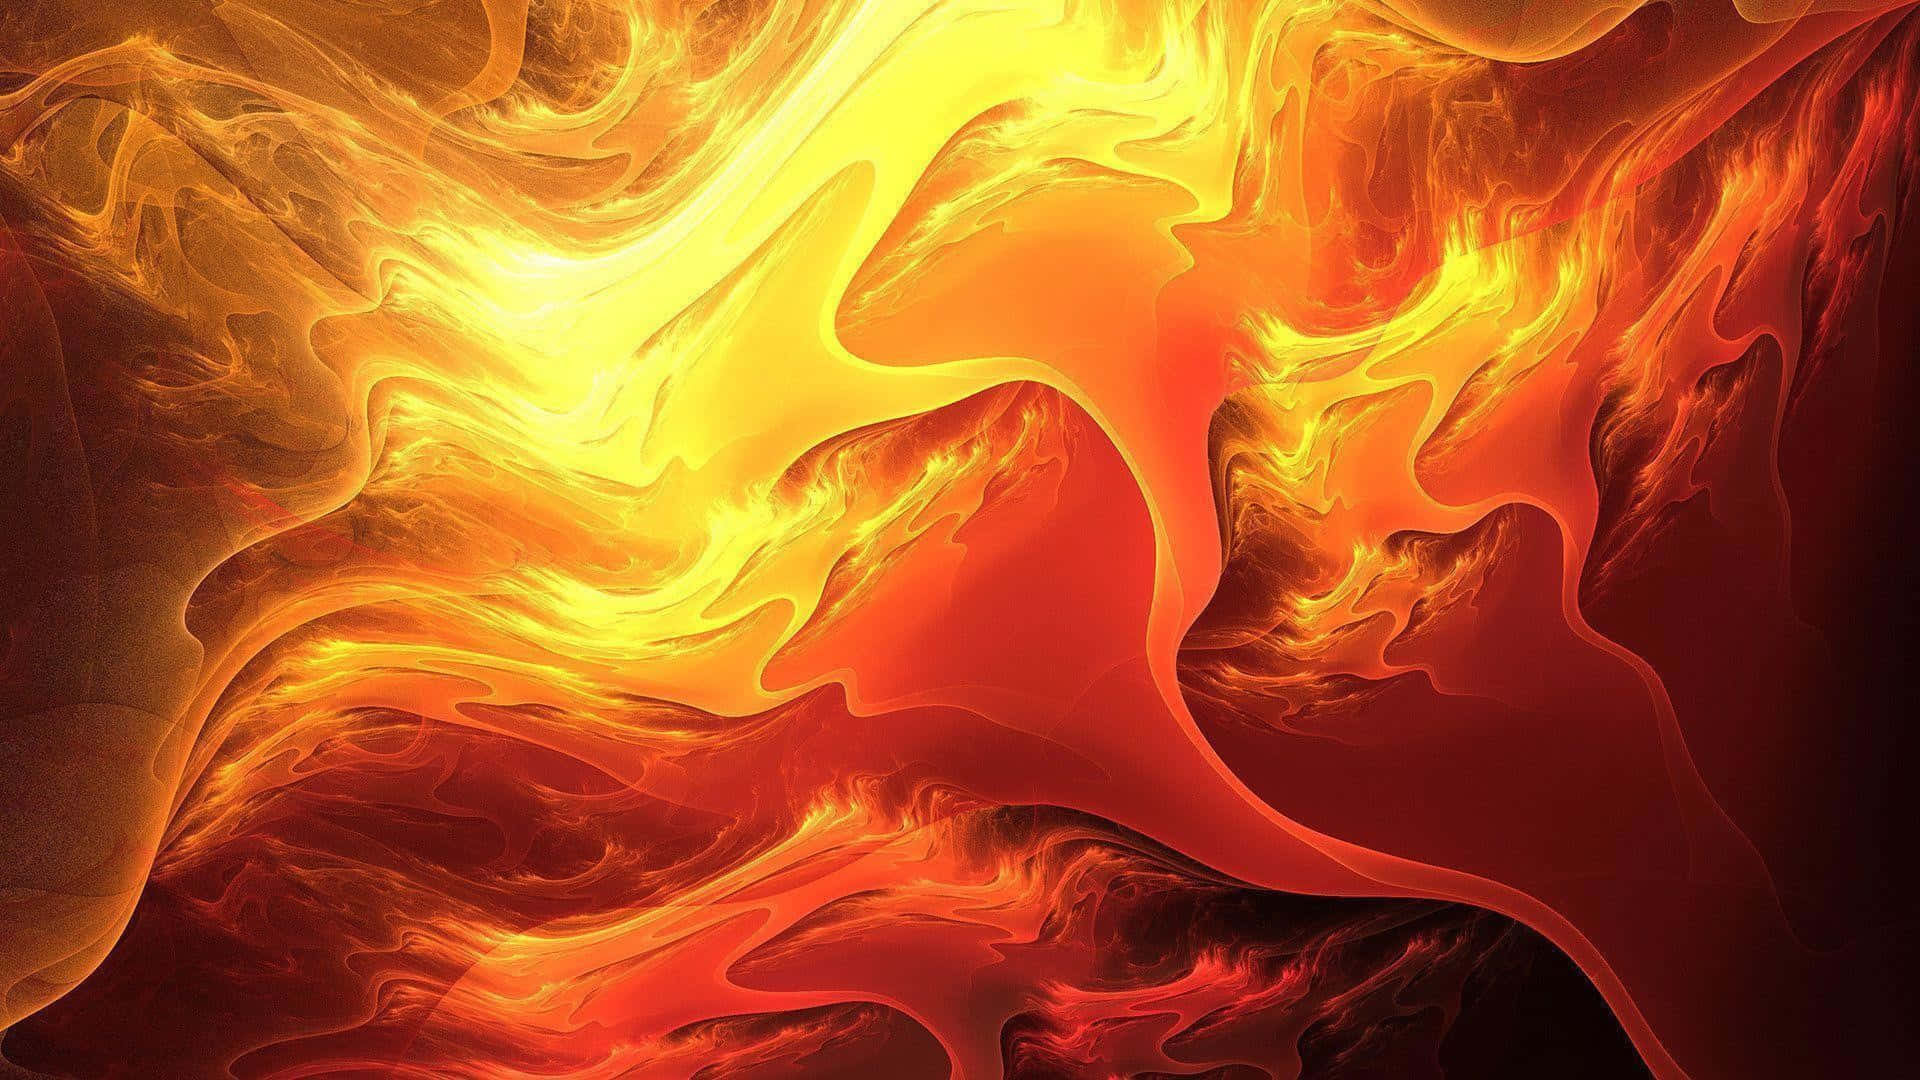 A Fire Abstract Art With A Red And Yellow Background